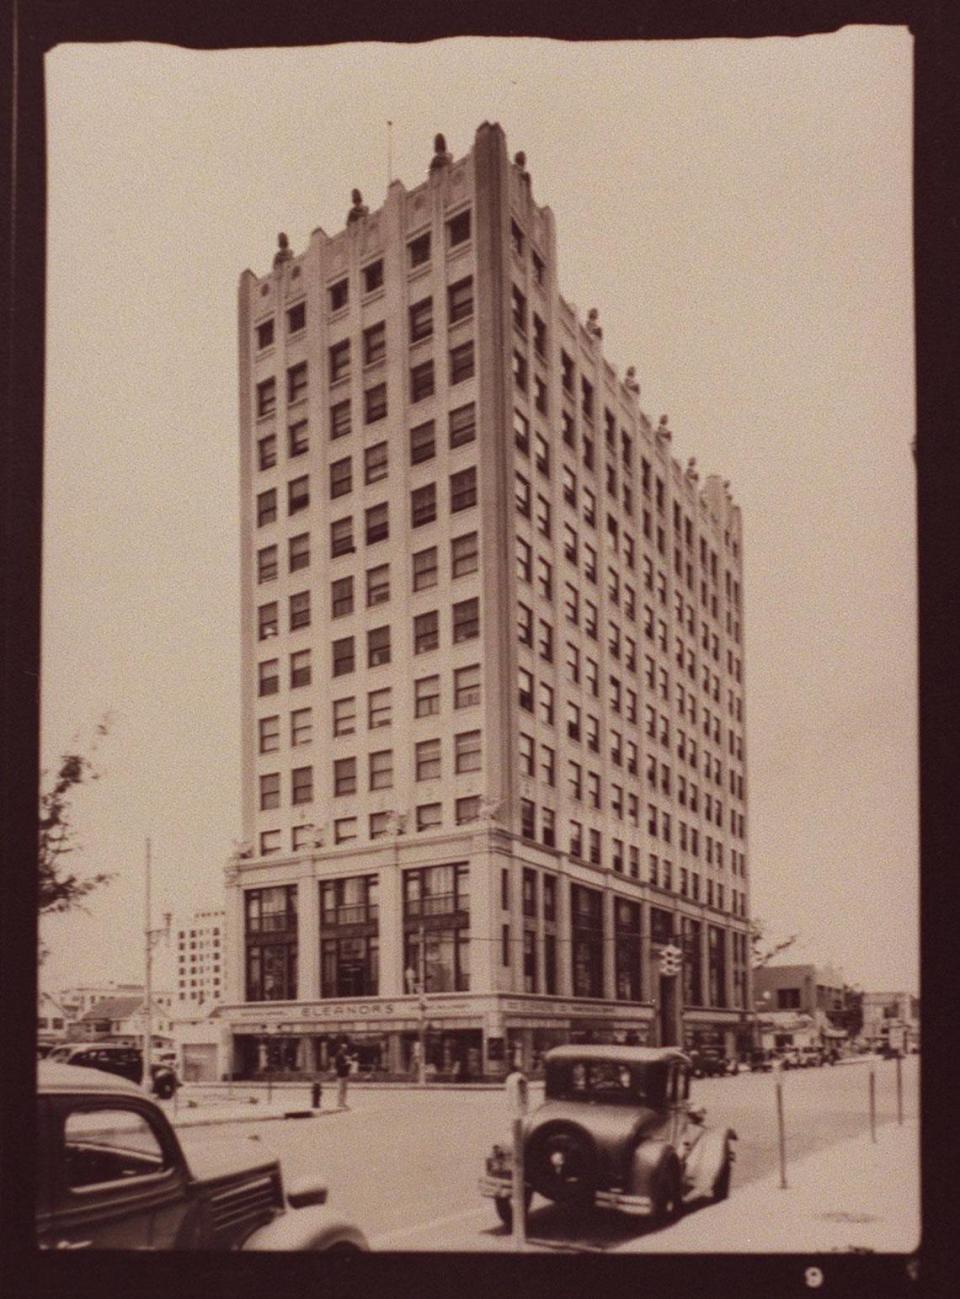 This is a copy of a photo of the Huntington Building in downtown Miami taken on June 12, 1936.